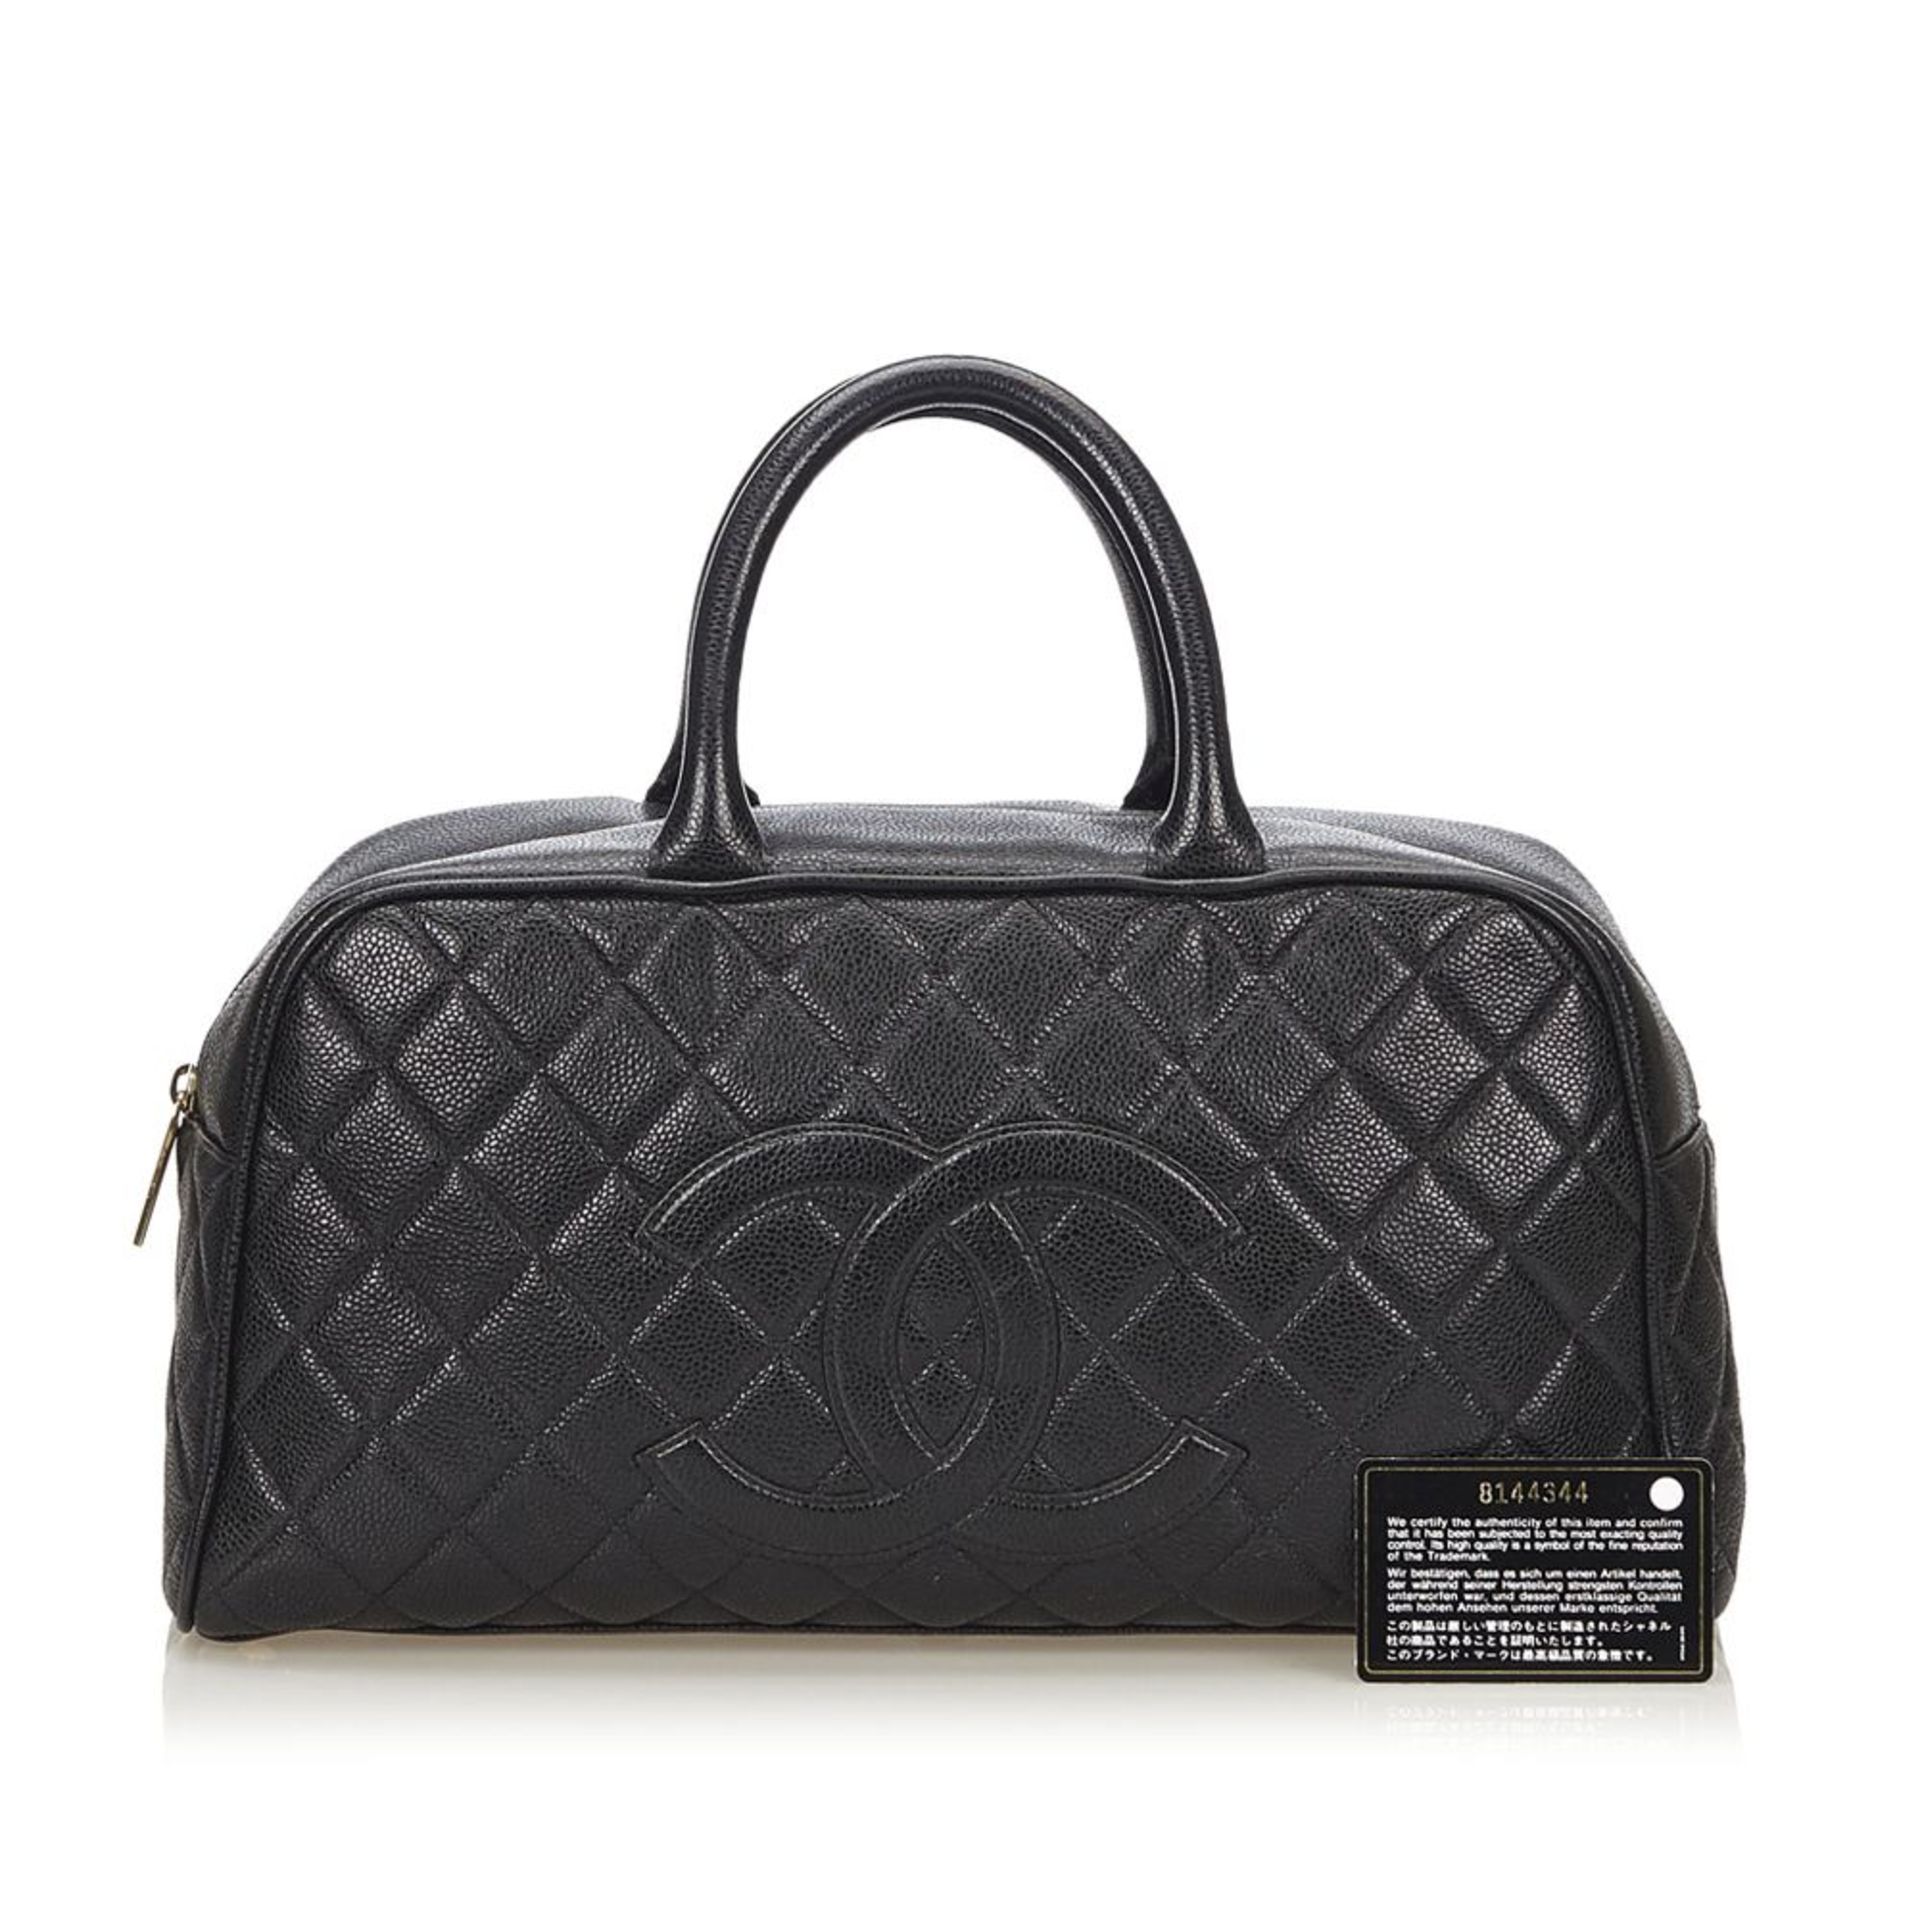 A Chanel caviar leather bowling handbag,this Boston bag features a quilted caviar leather body, with - Bild 3 aus 3